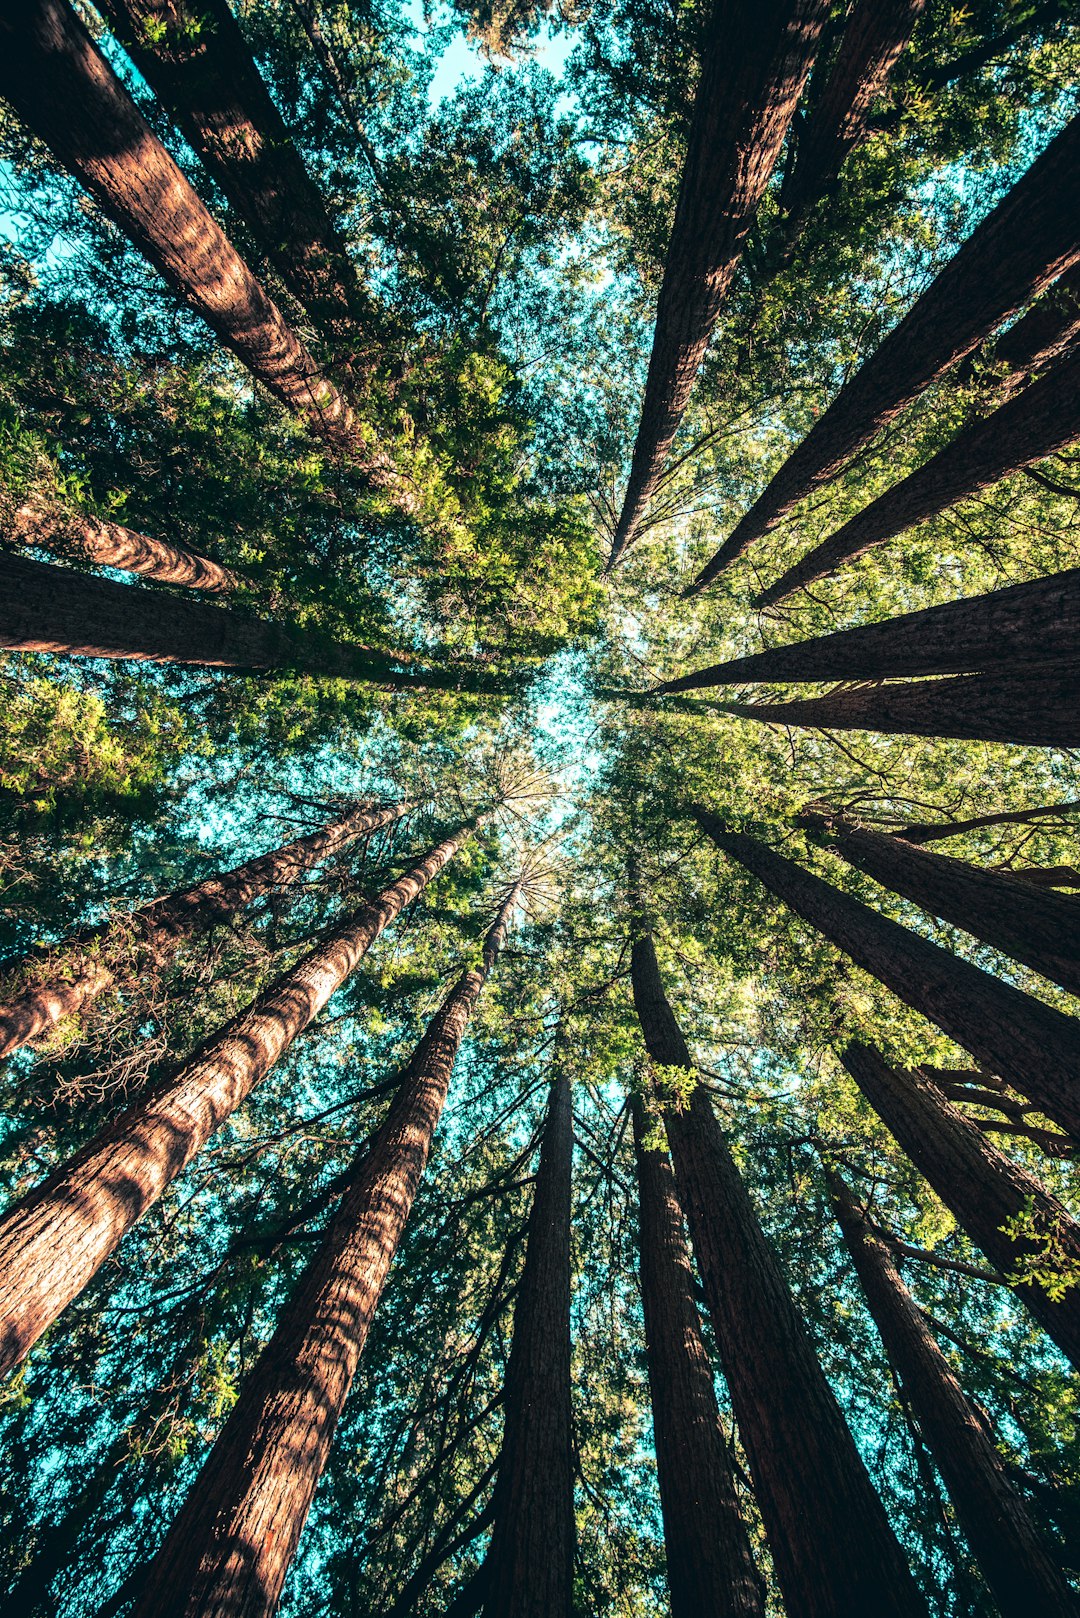 A photo of the top view looking up at tall redwood trees, looking down into their crowns from below. The sky is clear and blue in color. –ar 85:128